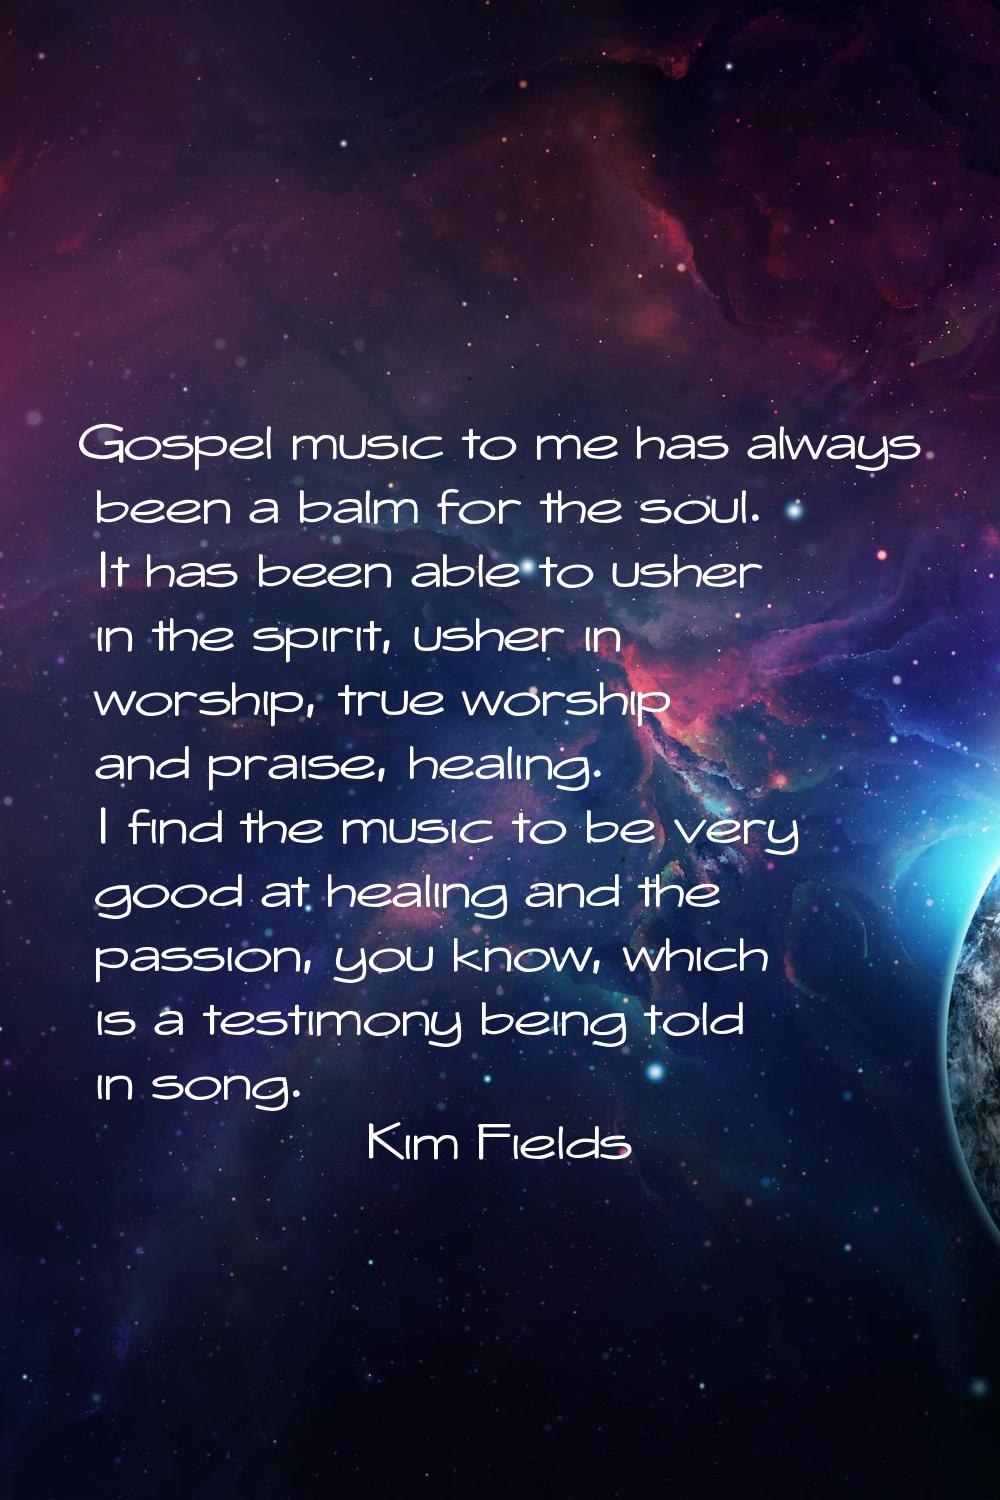 Gospel music to me has always been a balm for the soul. It has been able to usher in the spirit, us